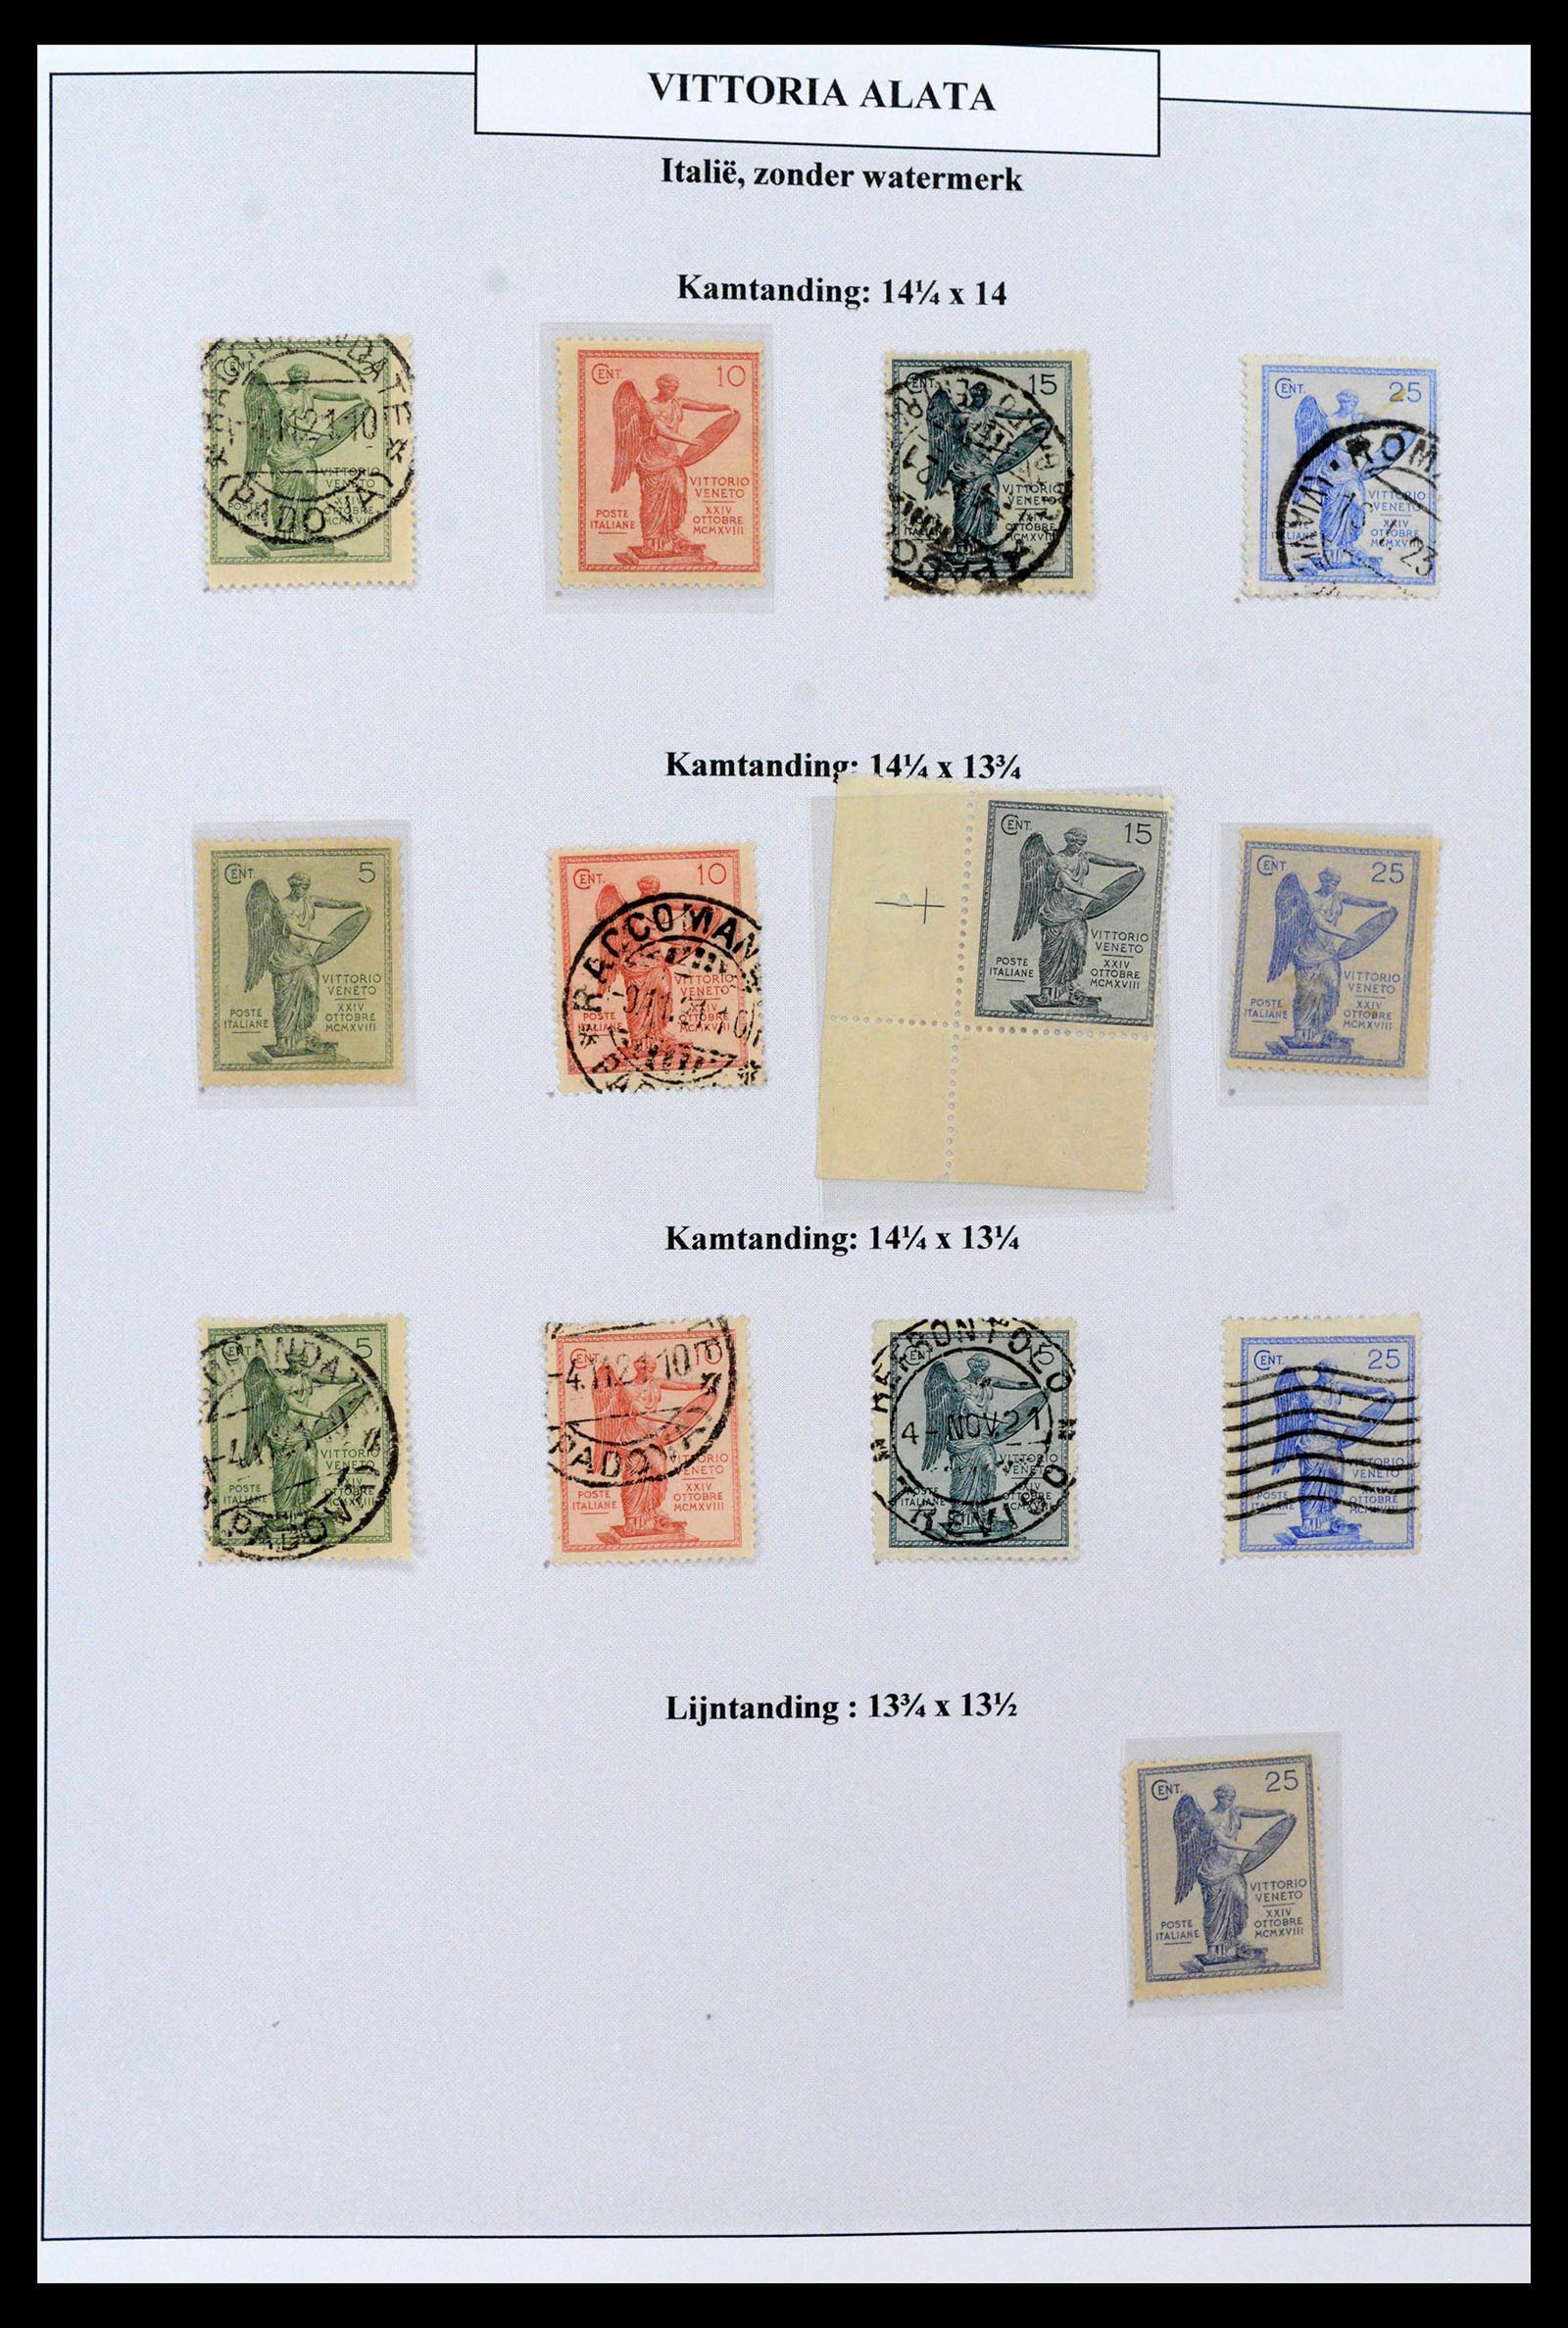 38515 0024 - Stamp collection 38515 Italy and colonies special collection Vittorio 19